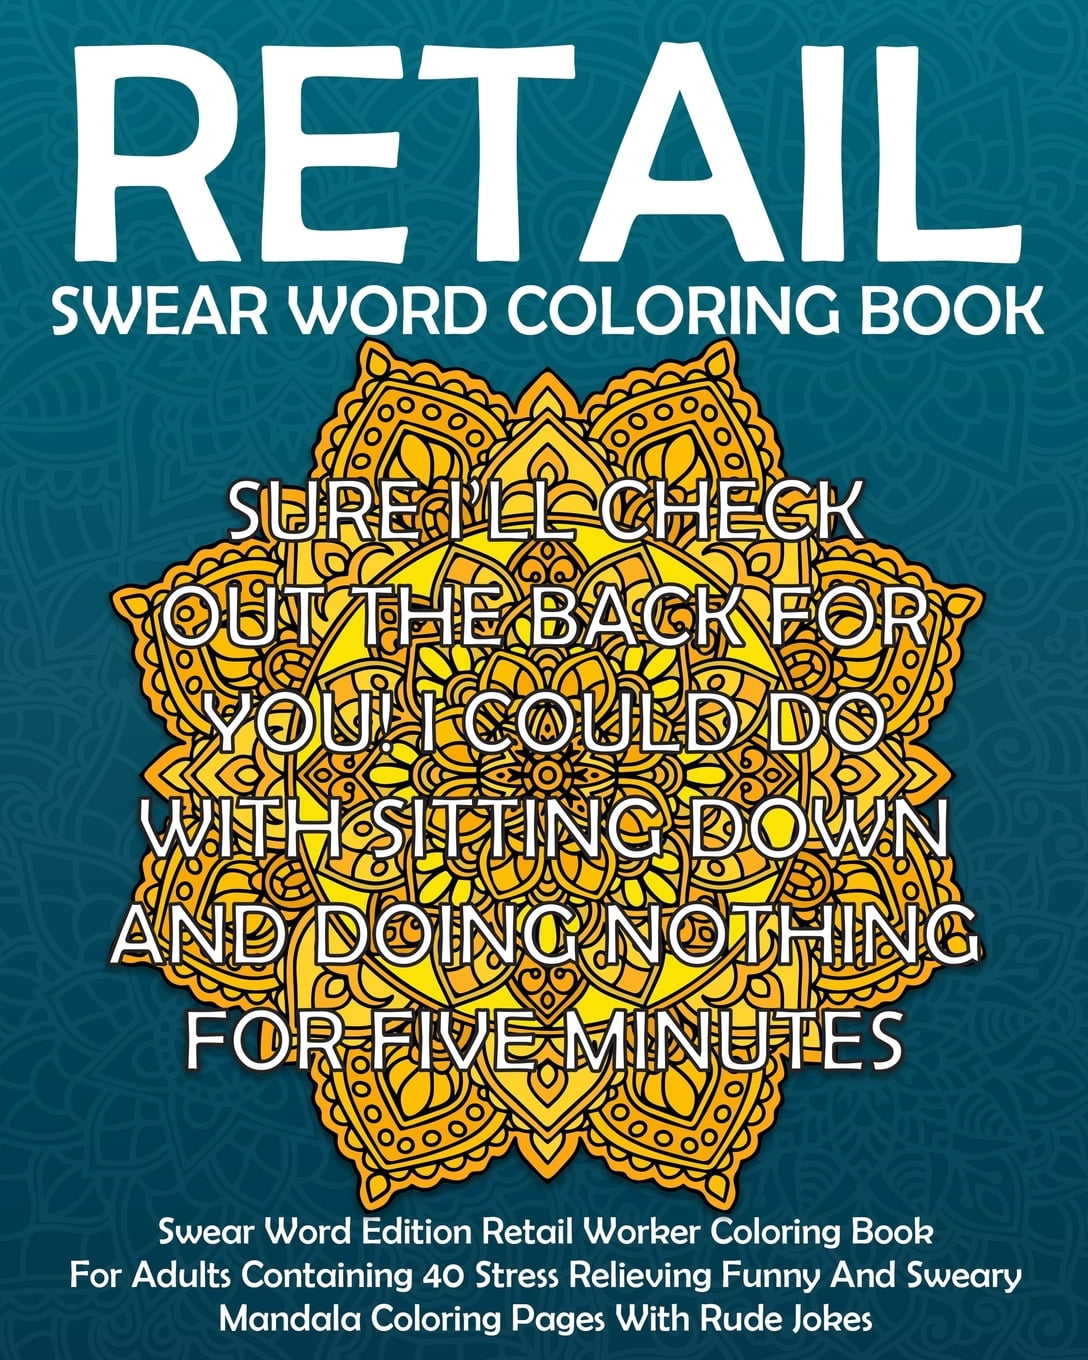 Download Funny Retail Gift Coloring Books Swear Word Retail Coloring Book Swear Word Edition Retail Worker Coloring Book For Adults Containing 40 Stress Relieving Funny Sweary Mandala Coloring Pages With Rude Job